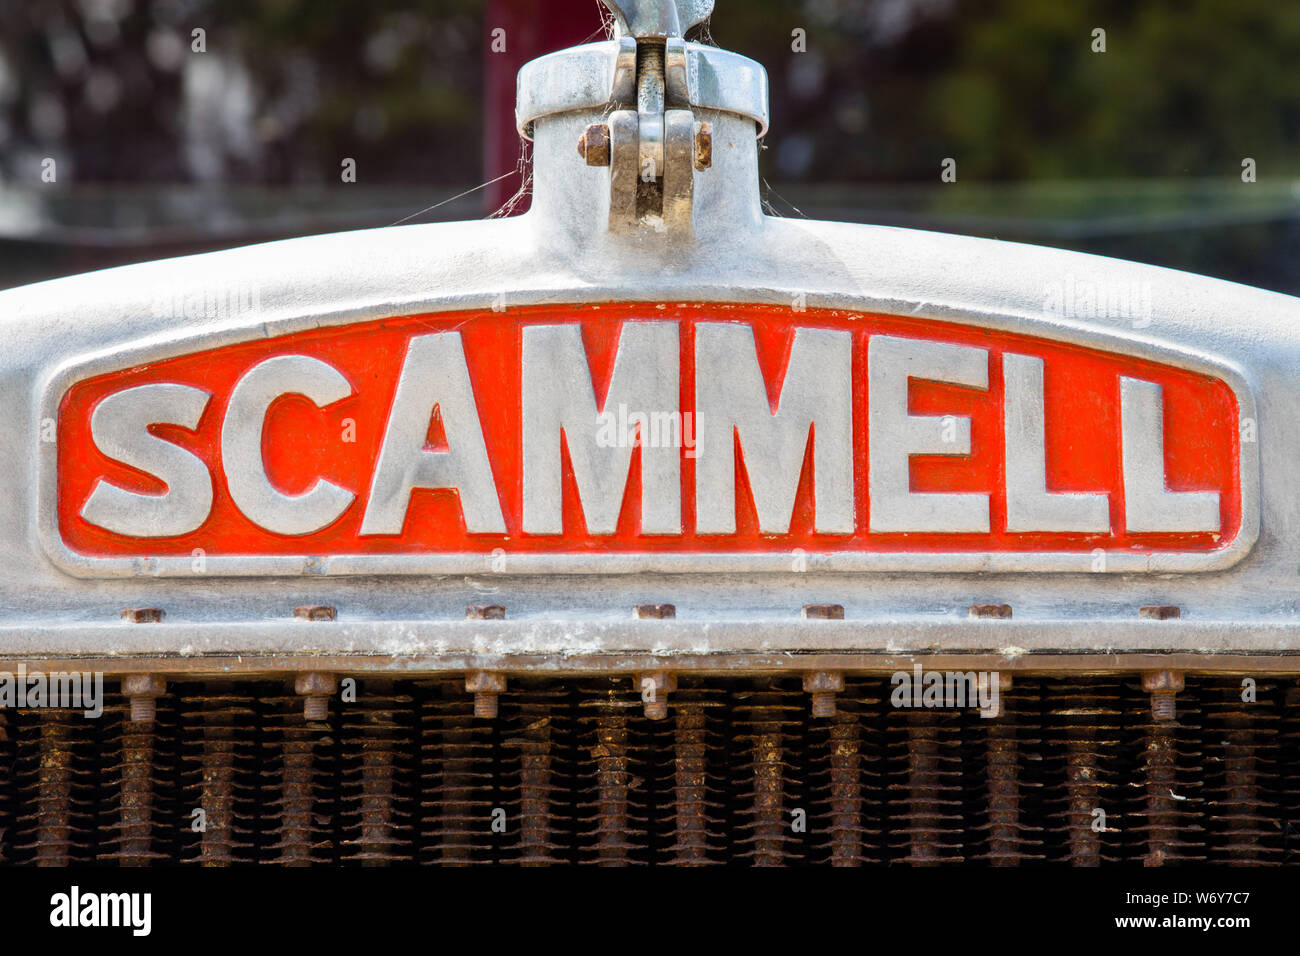 Vintage 1932 Scammell lorry badge Stock Photo